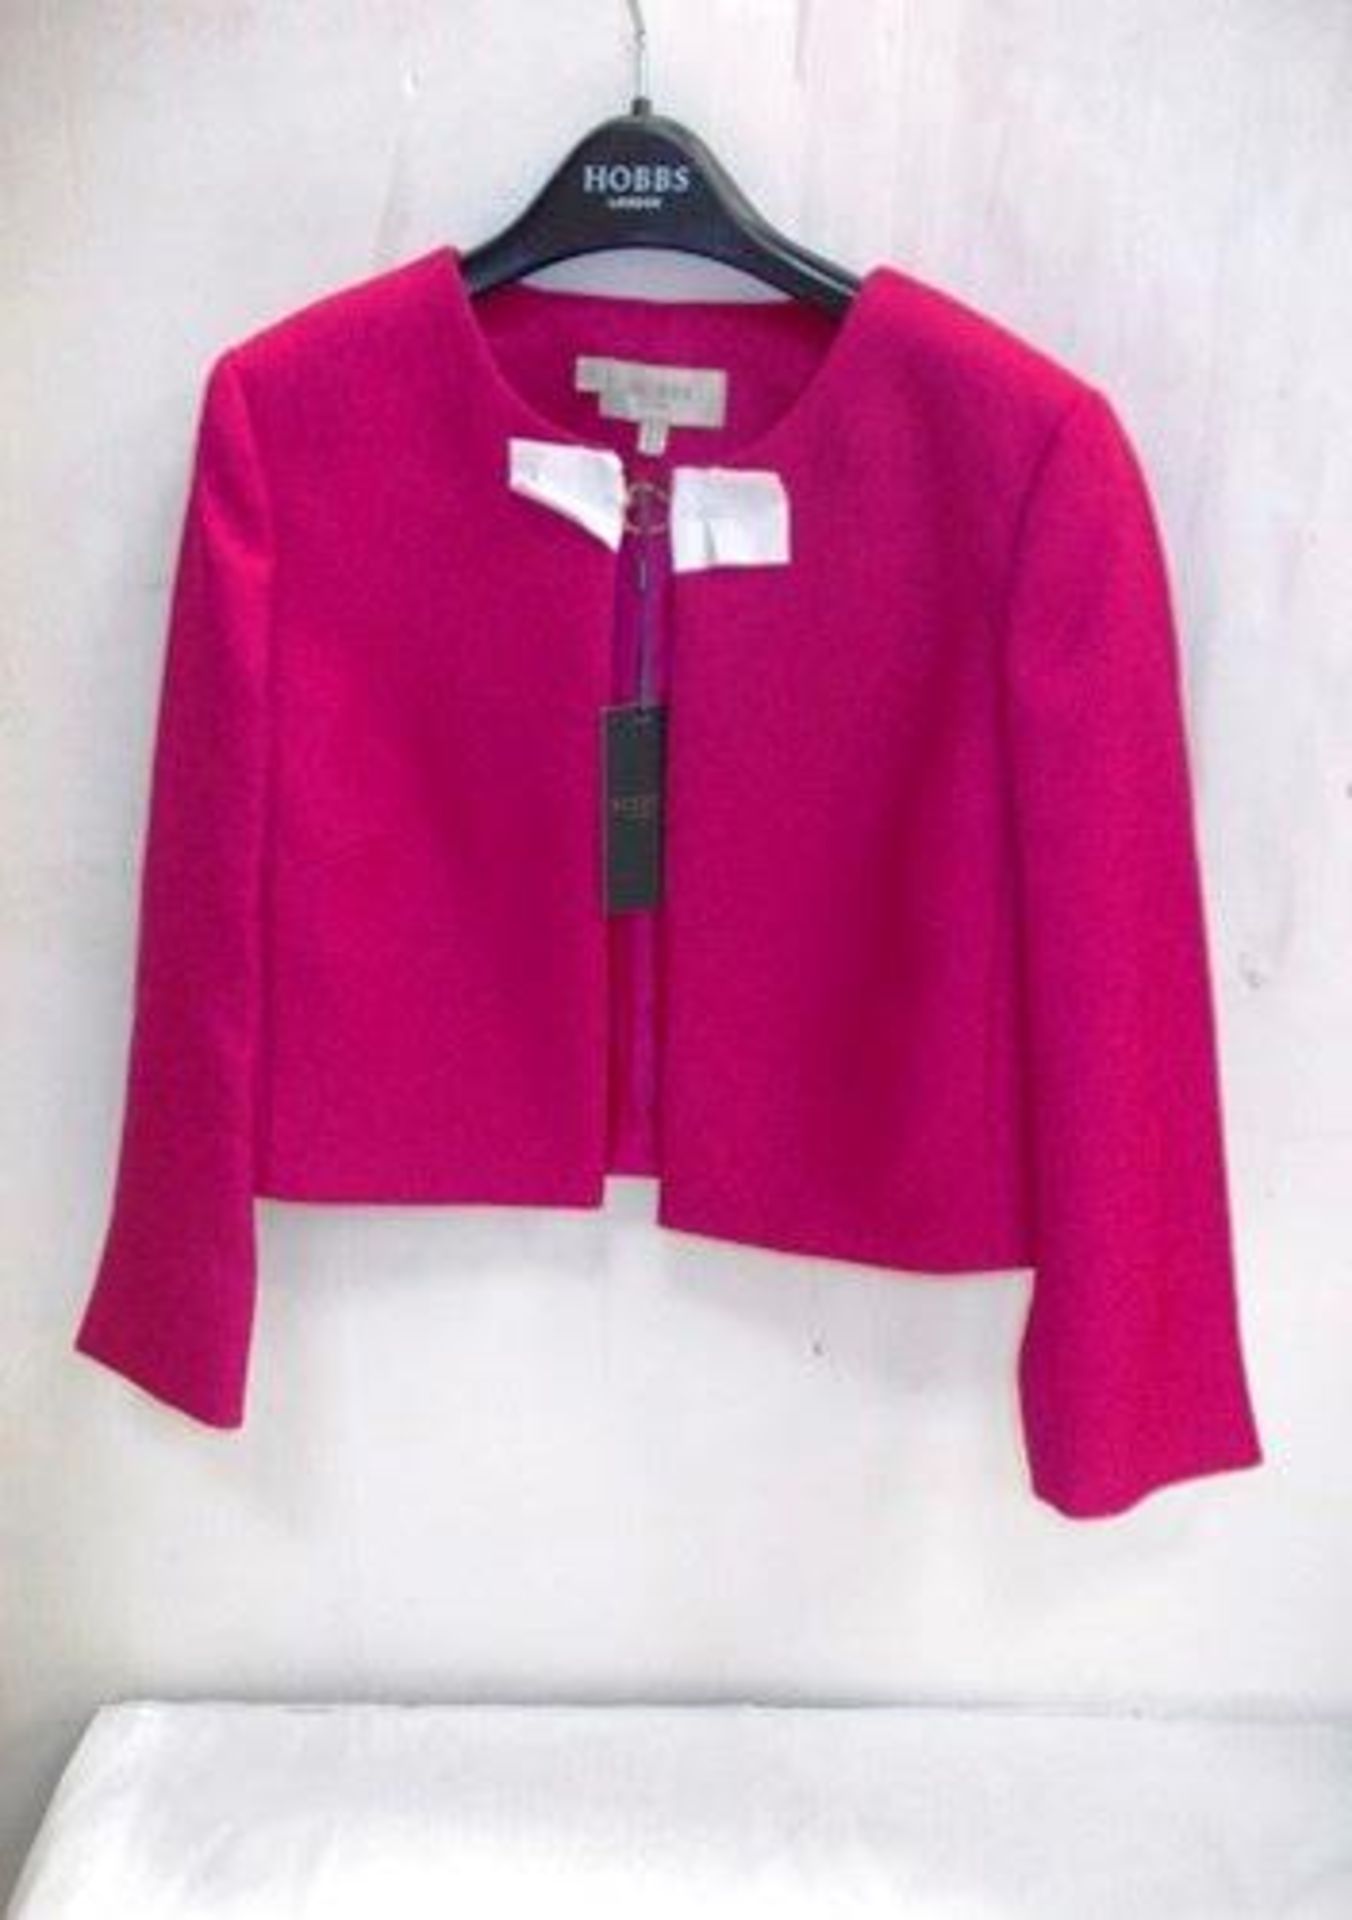 2 x Hobbs Elize jackets in fiesta pink, 1 x size 10 and 1 x size 12 - New (crail3)